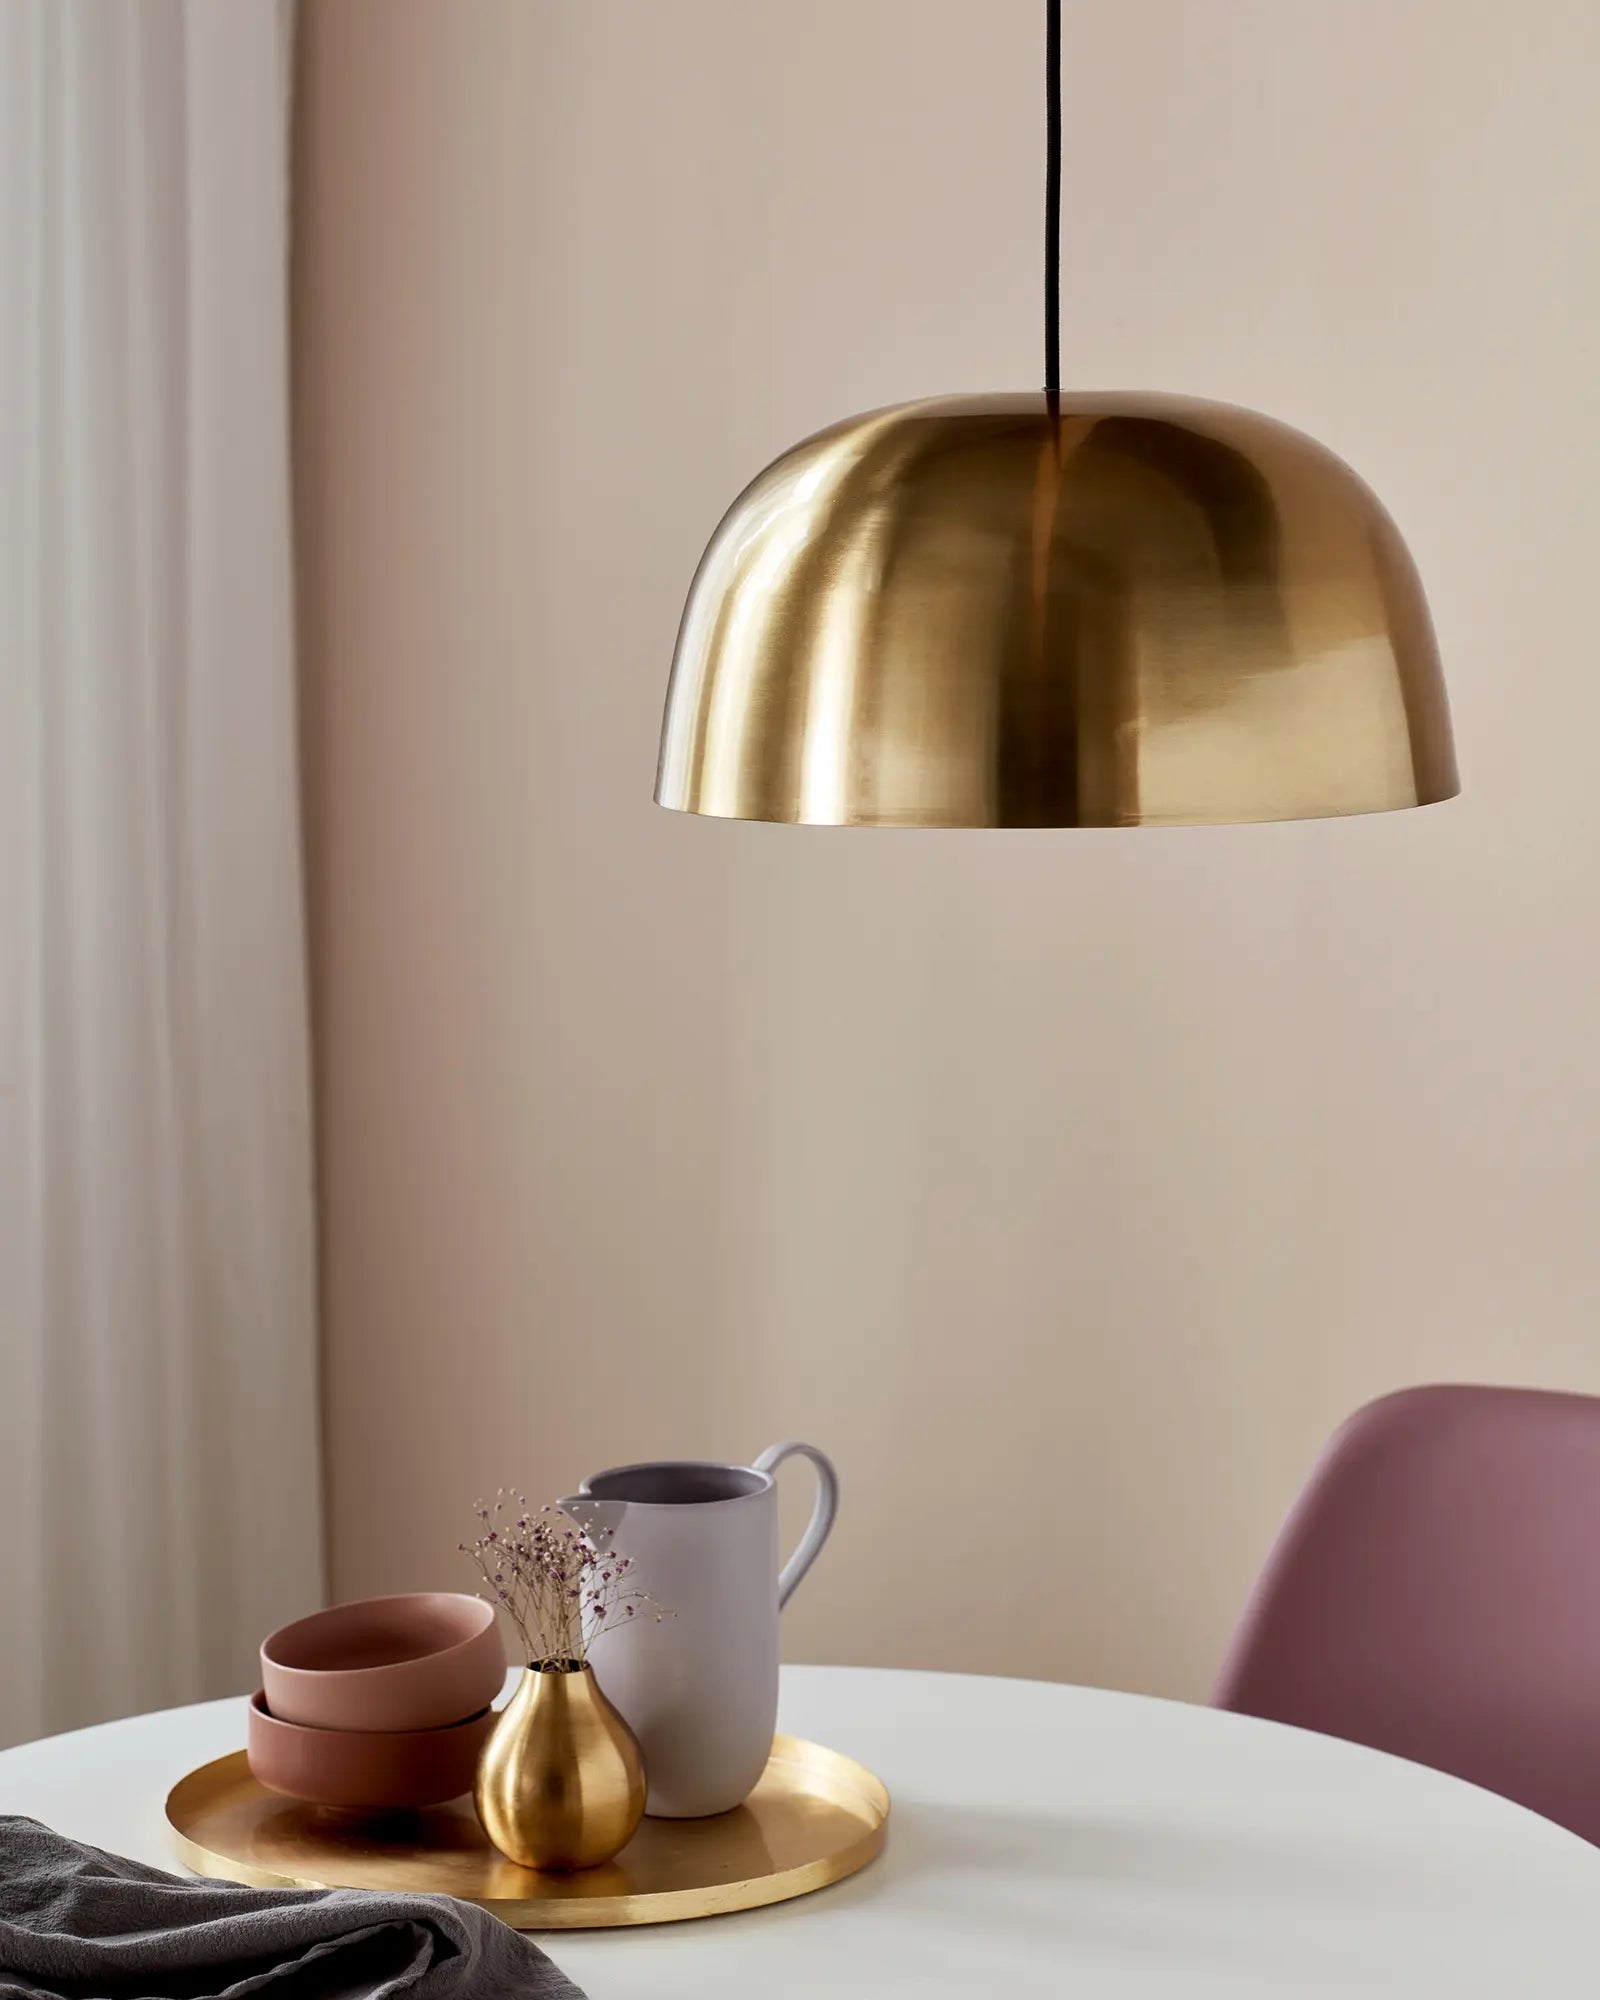 Cera large brass dome pendant light above a dining table